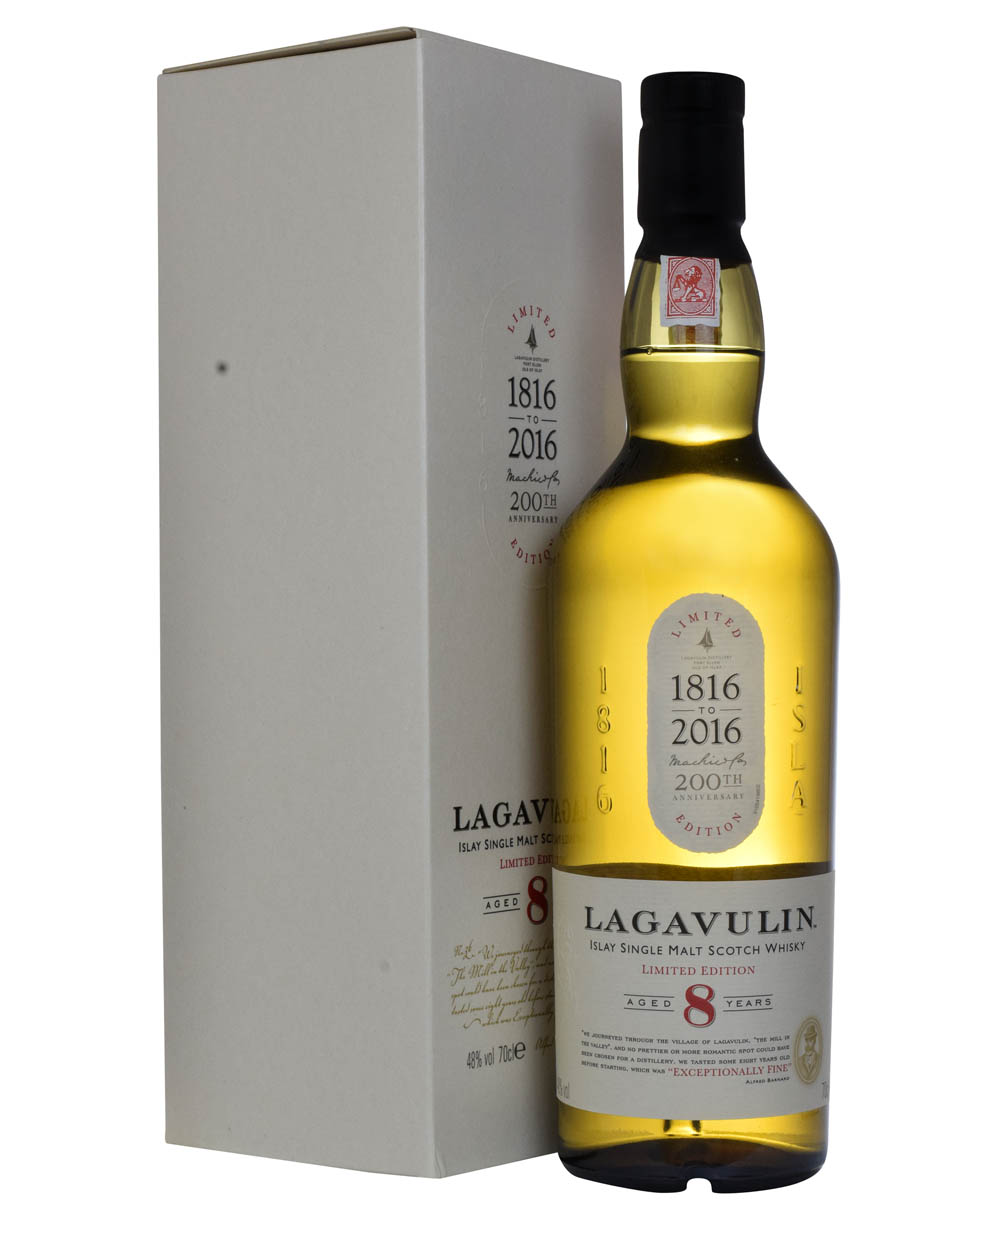 Lagavulin 8 Years Old 200th Anniversary 2016 Box Musthave Malts MHM